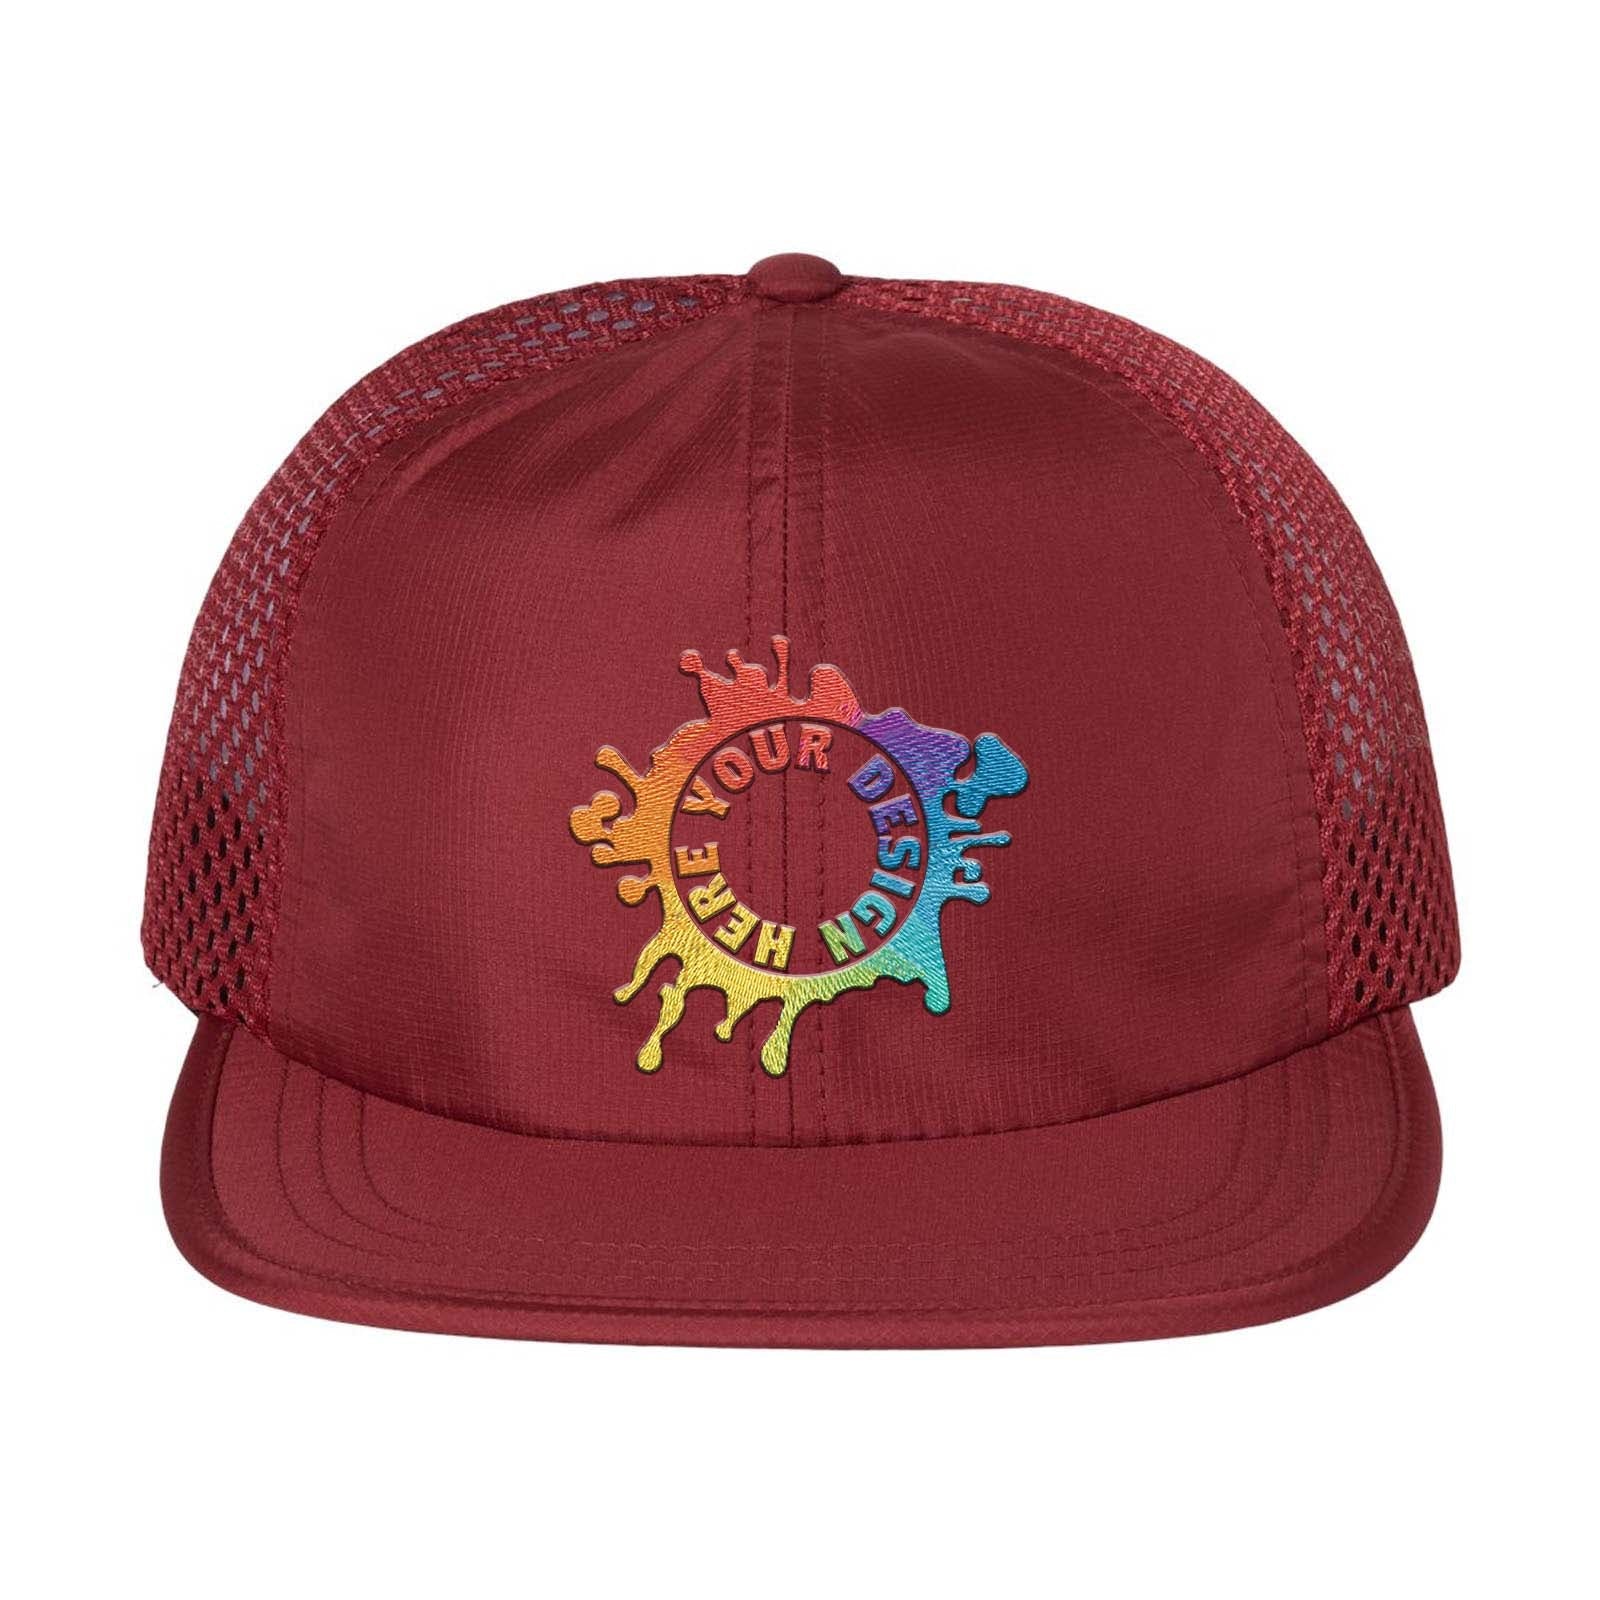 Embroidered Richardson Rouge Wide Set Mesh Cap - Mato & Hash